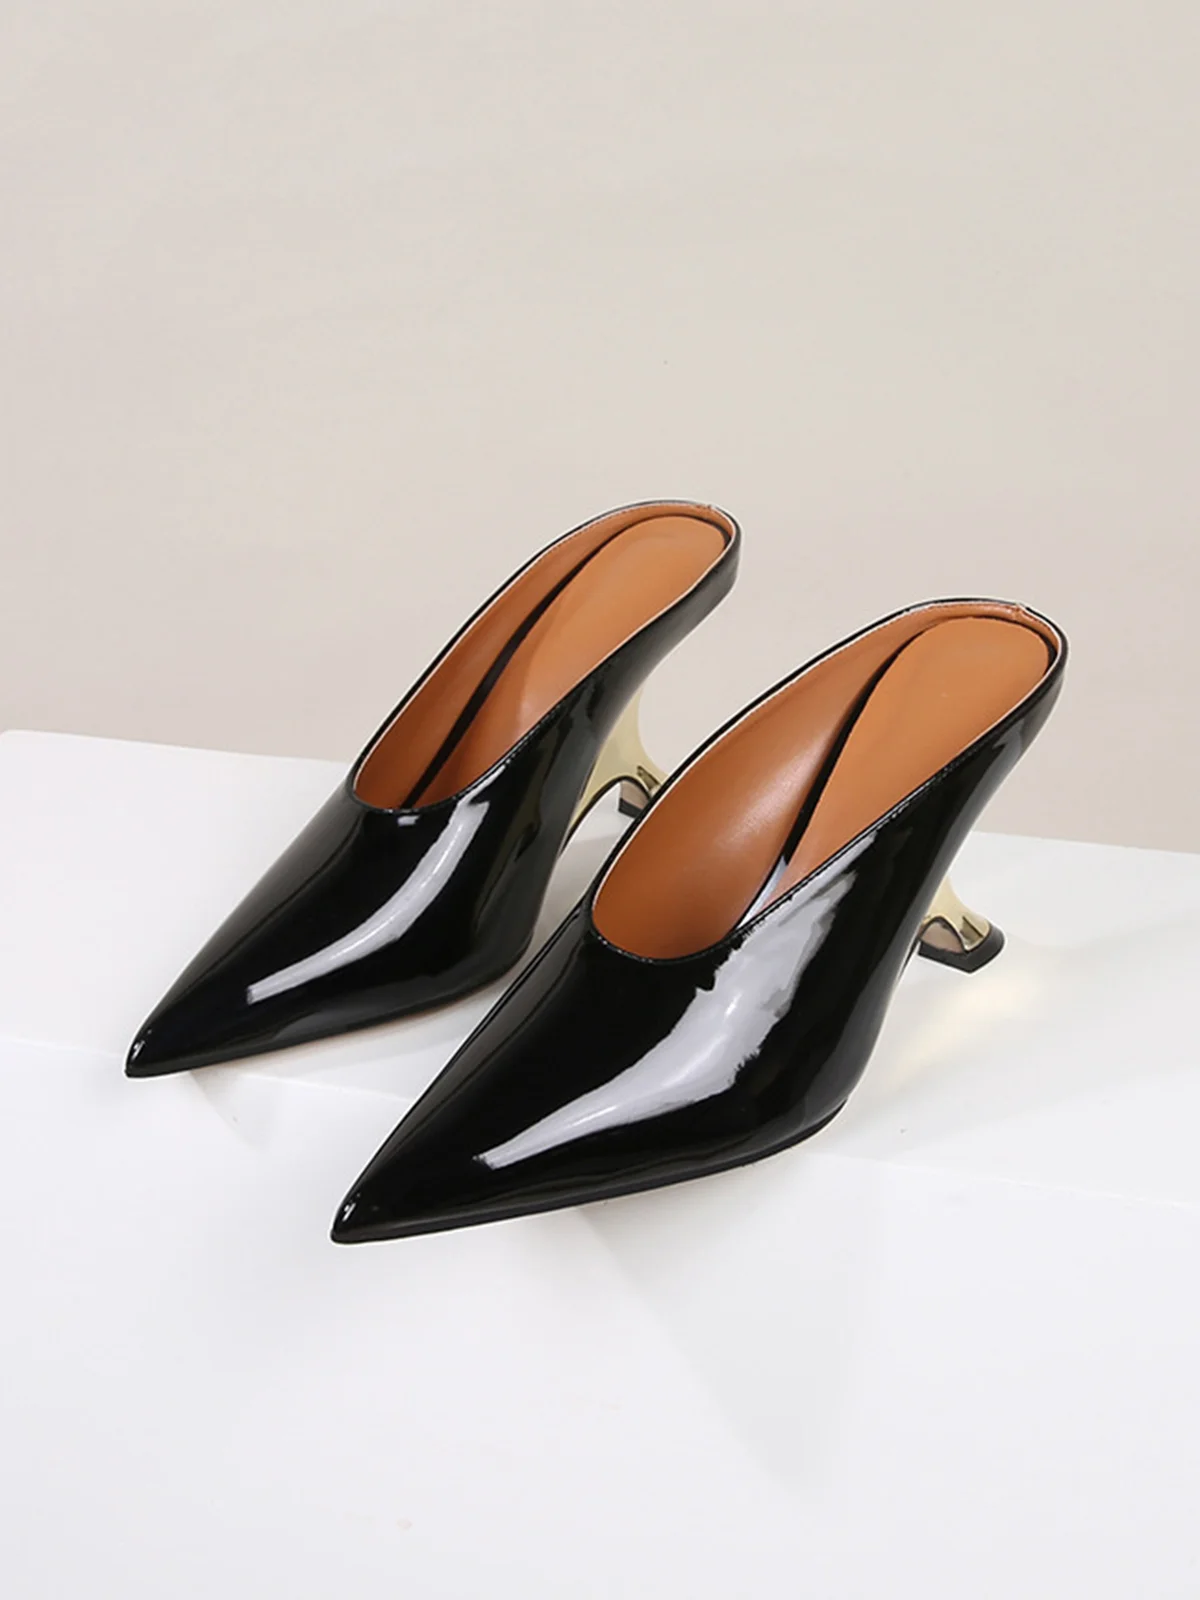 Glamorous Patent Leather Sculptural Wedge Heel Mules